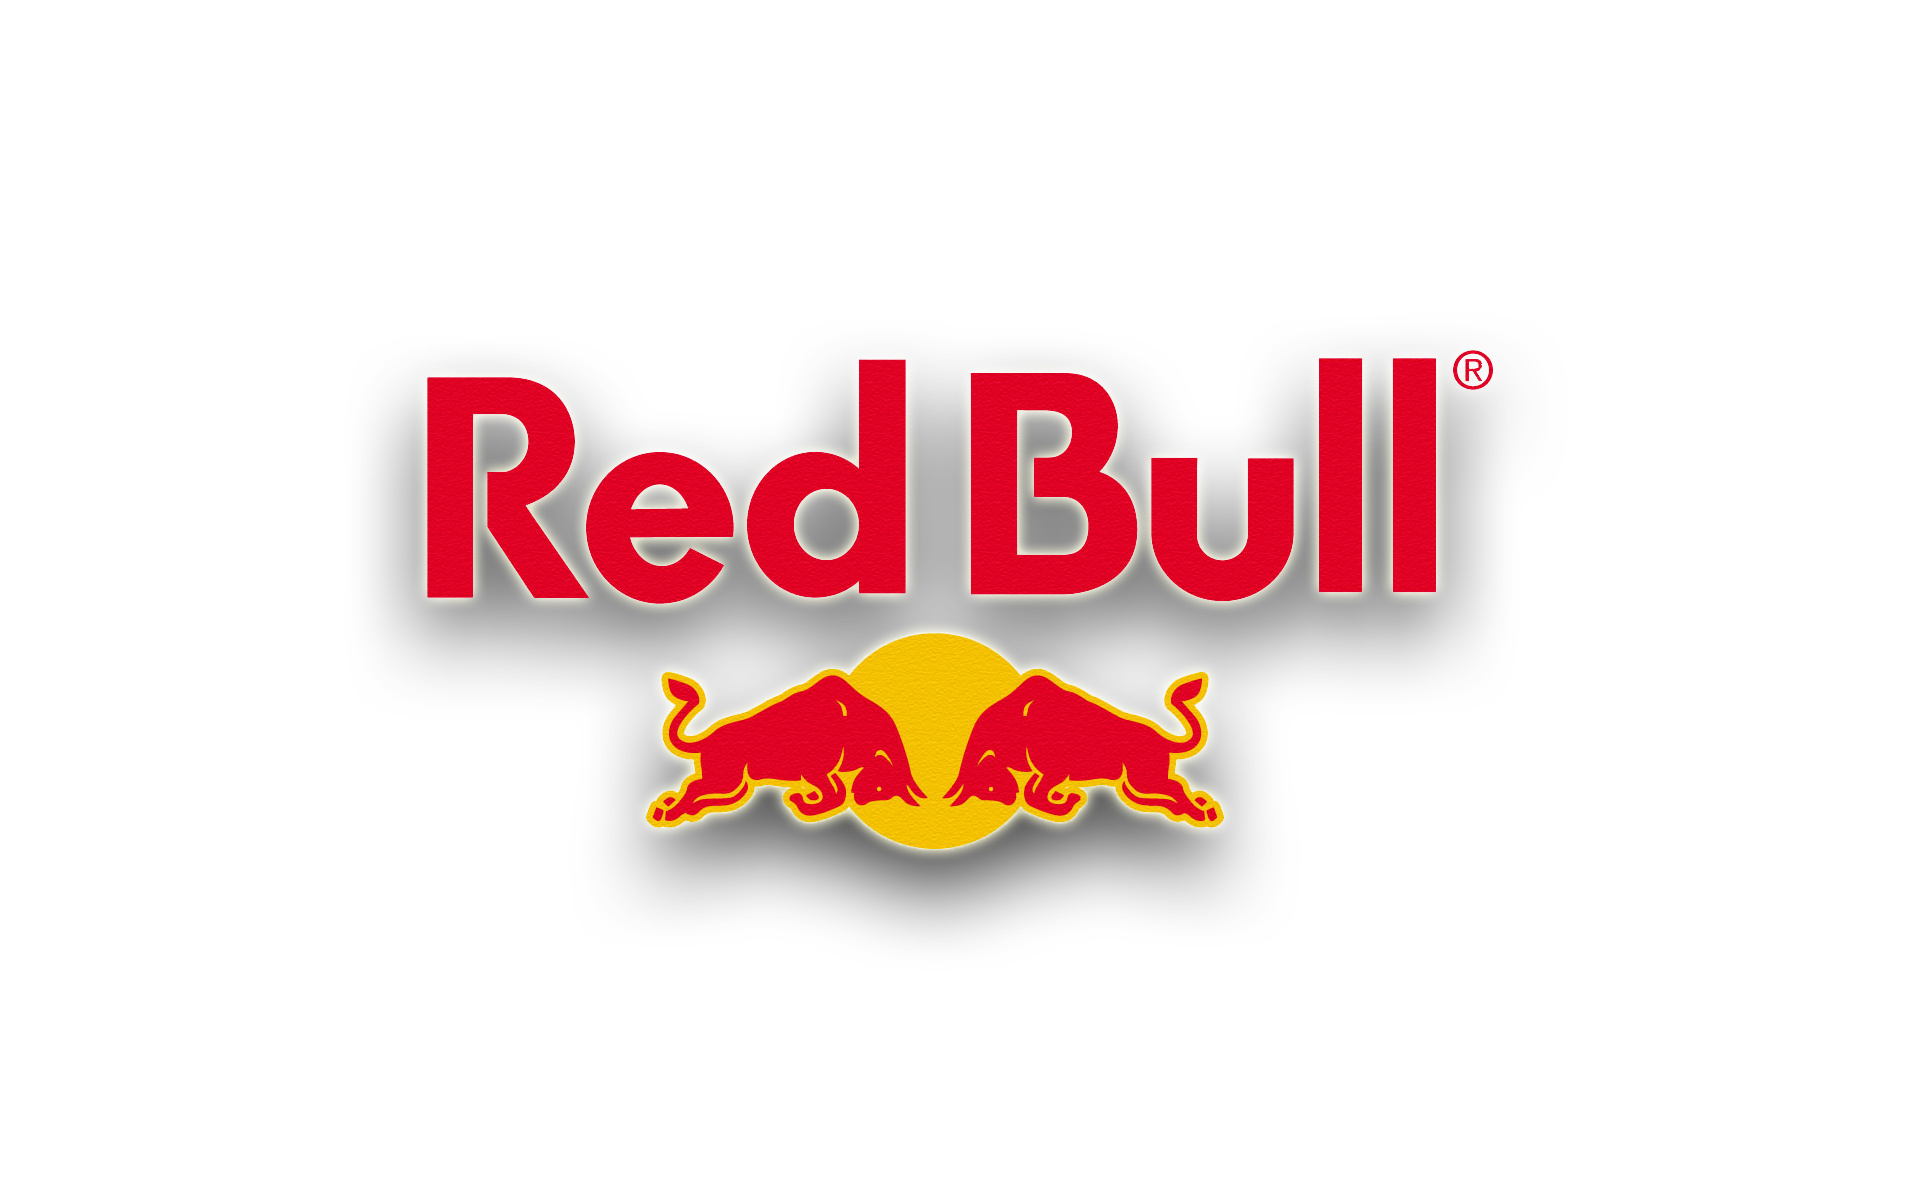 Red Bull Logo: Slogan: Red Bull Gives You Wings, A carbonated taurine drink. 1920x1200 HD Wallpaper.